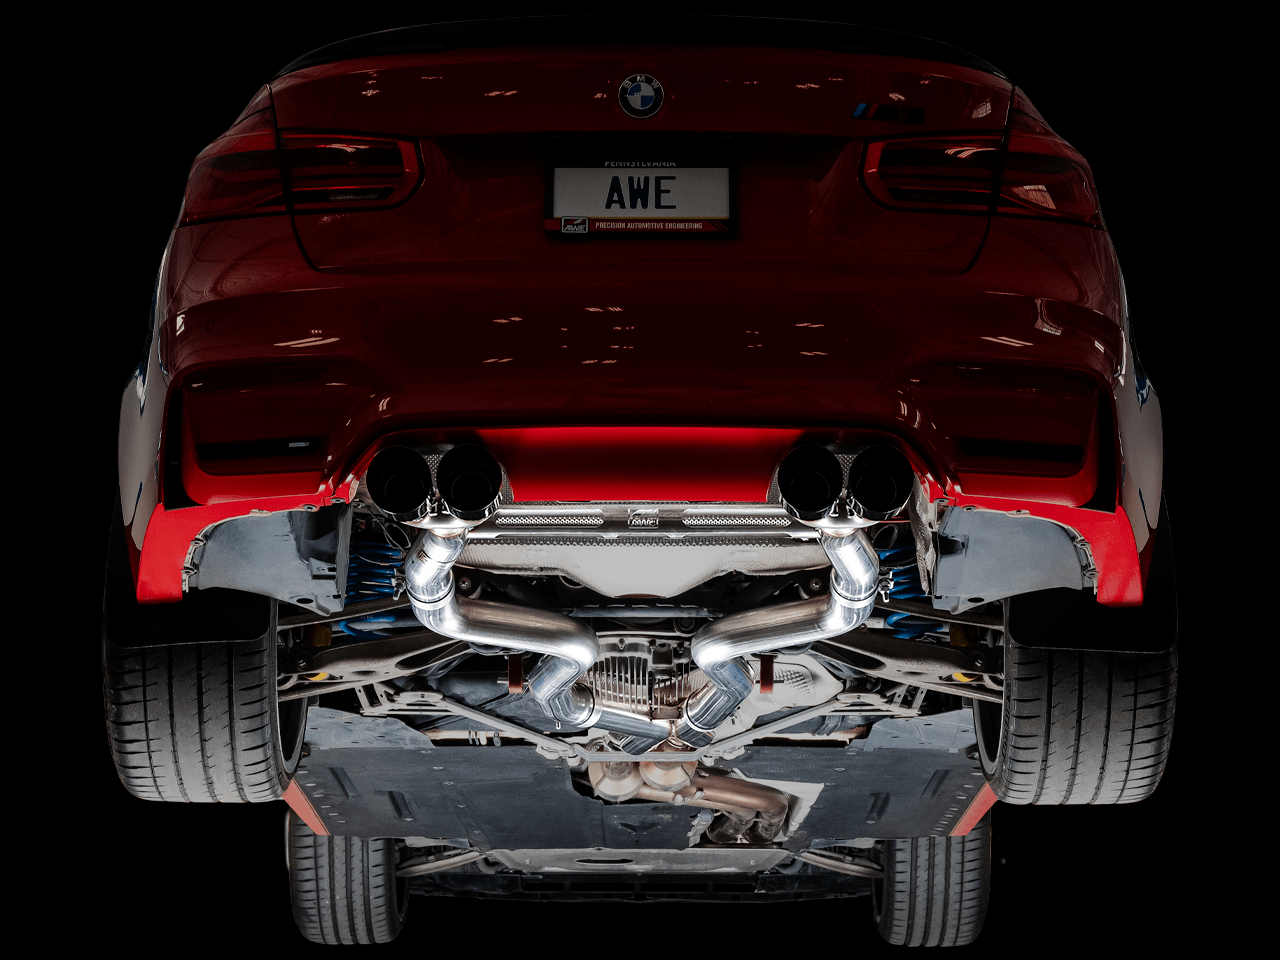 Kies-Motorsports AWE Tuning AWE Tuning BMW F8X M3/M4 Track Edition Catback Exhaust - Chrome Silver Tips